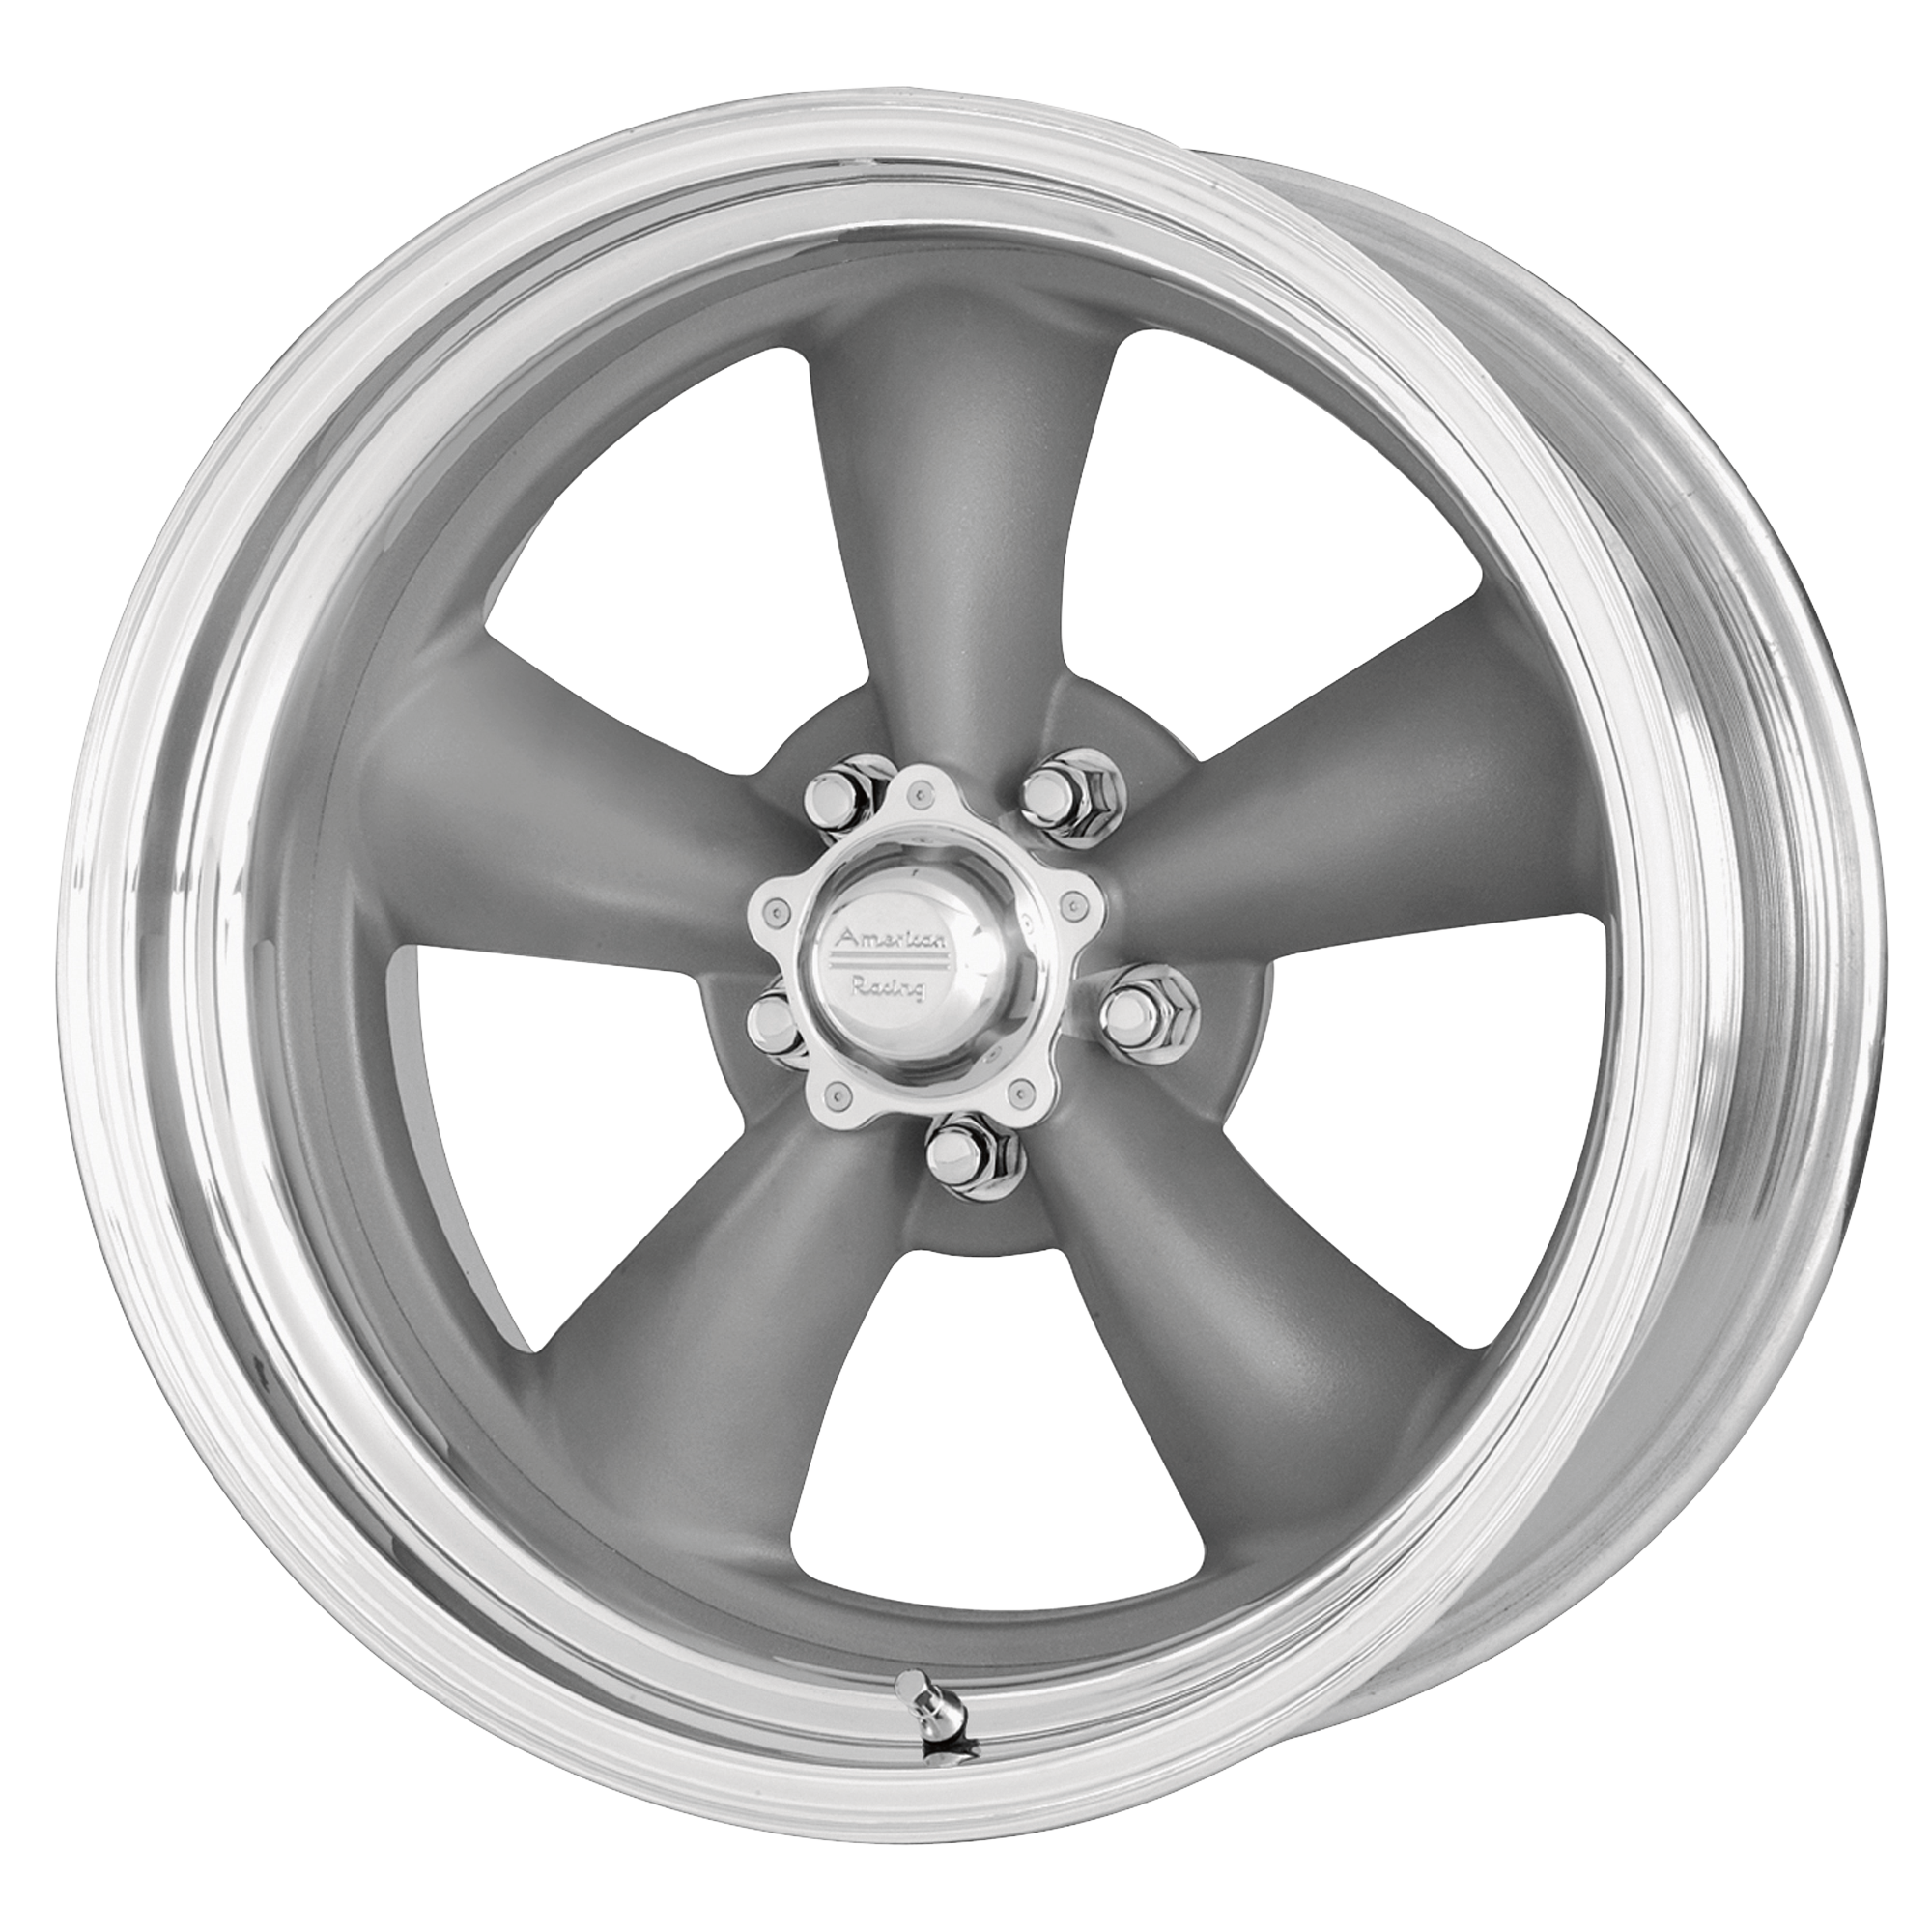 CLASSIC TORQ THRUST II ONE PIECE 16x7 5x114.30 MAG GRAY W/ MACHINED LIP (0 mm) - Tires and Engine Performance